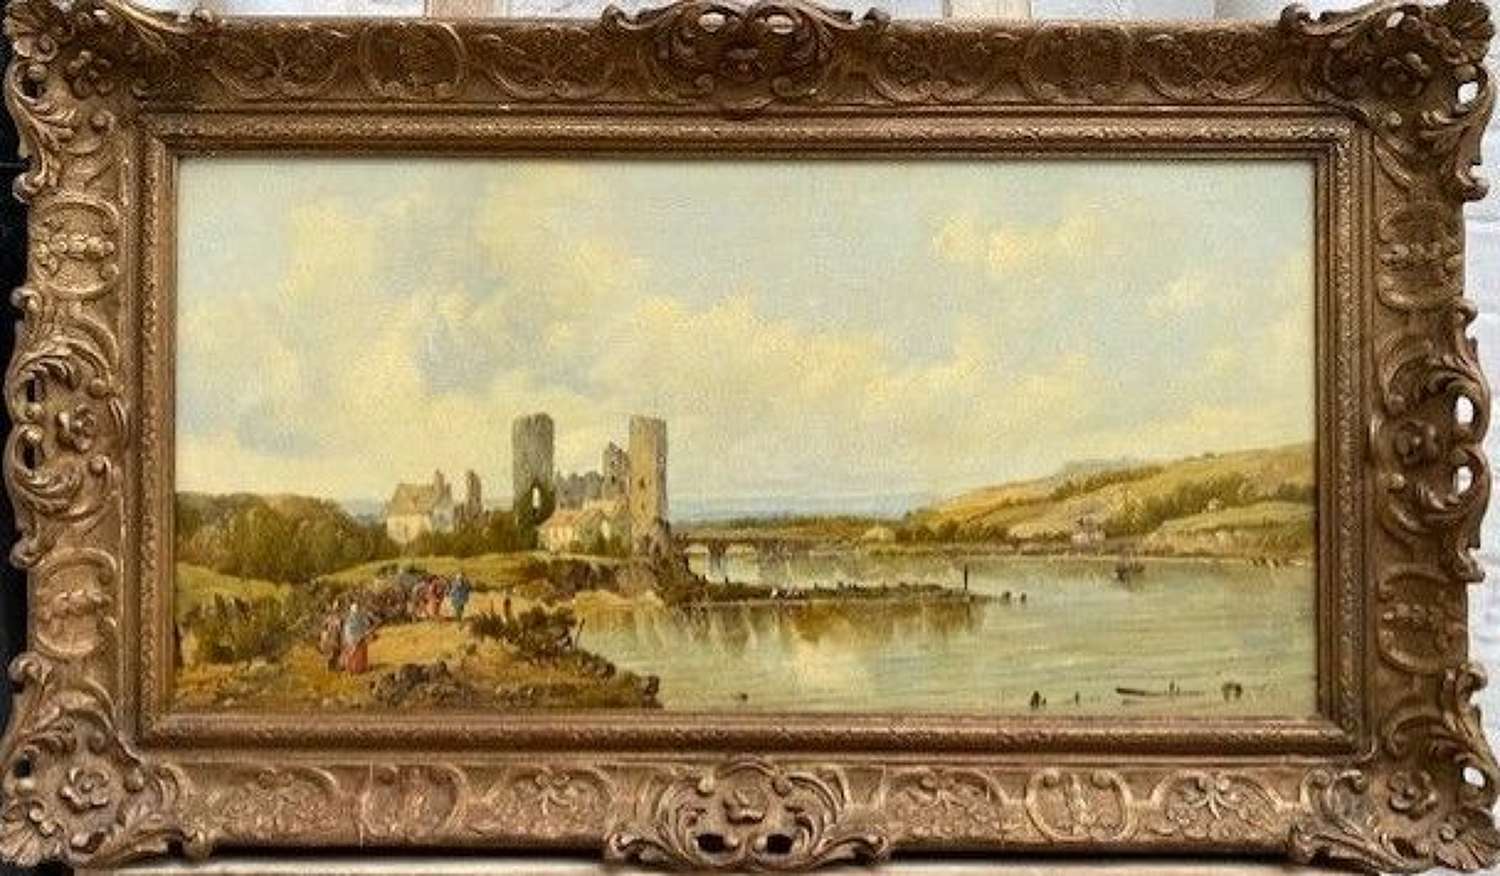 A late 19th century oil painting